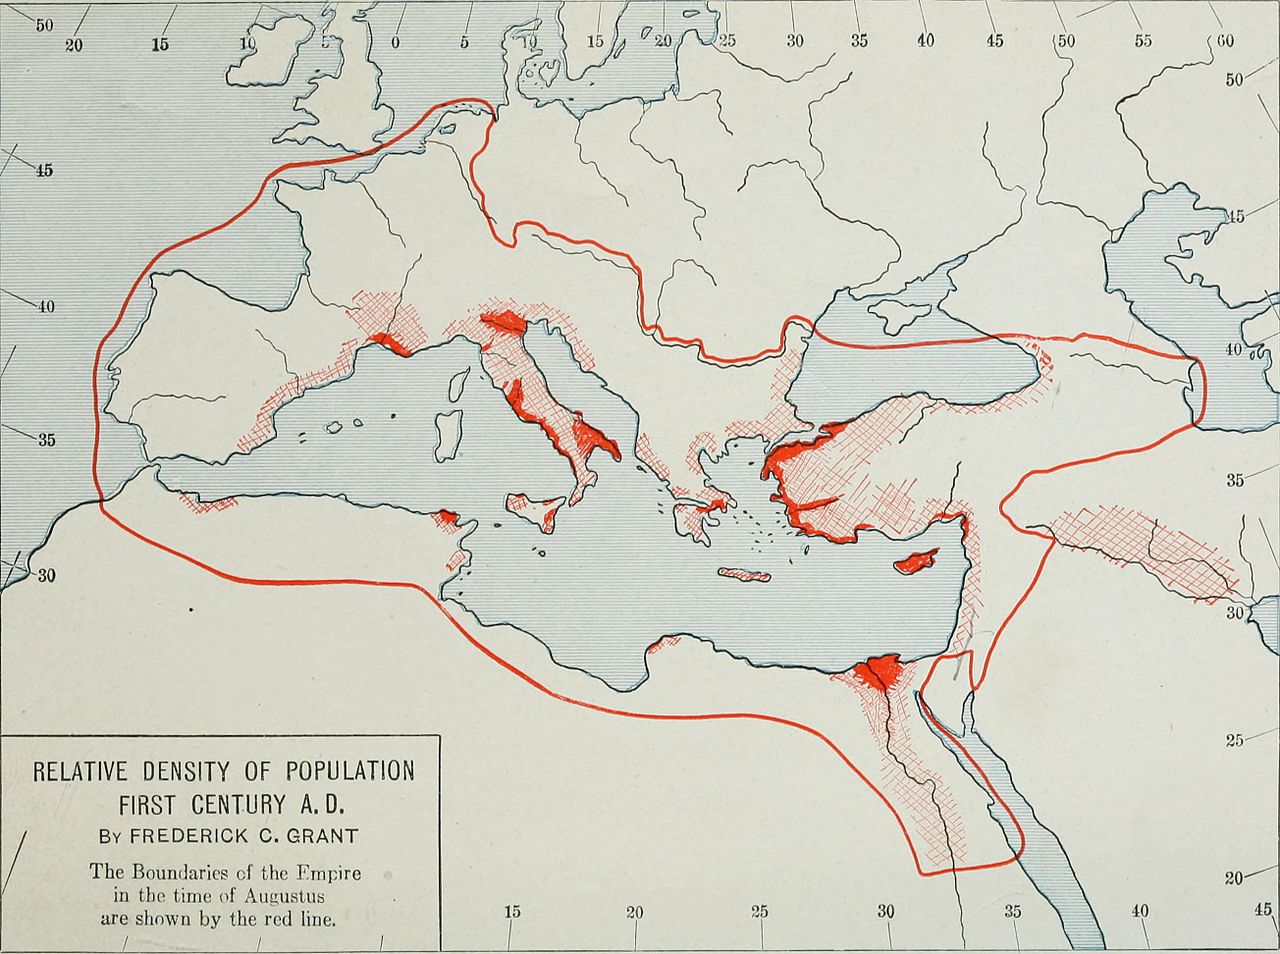 Map shows density of early Christian population (first century A.D.) and outlines the boundaries of the Empire during the time of Augustus.